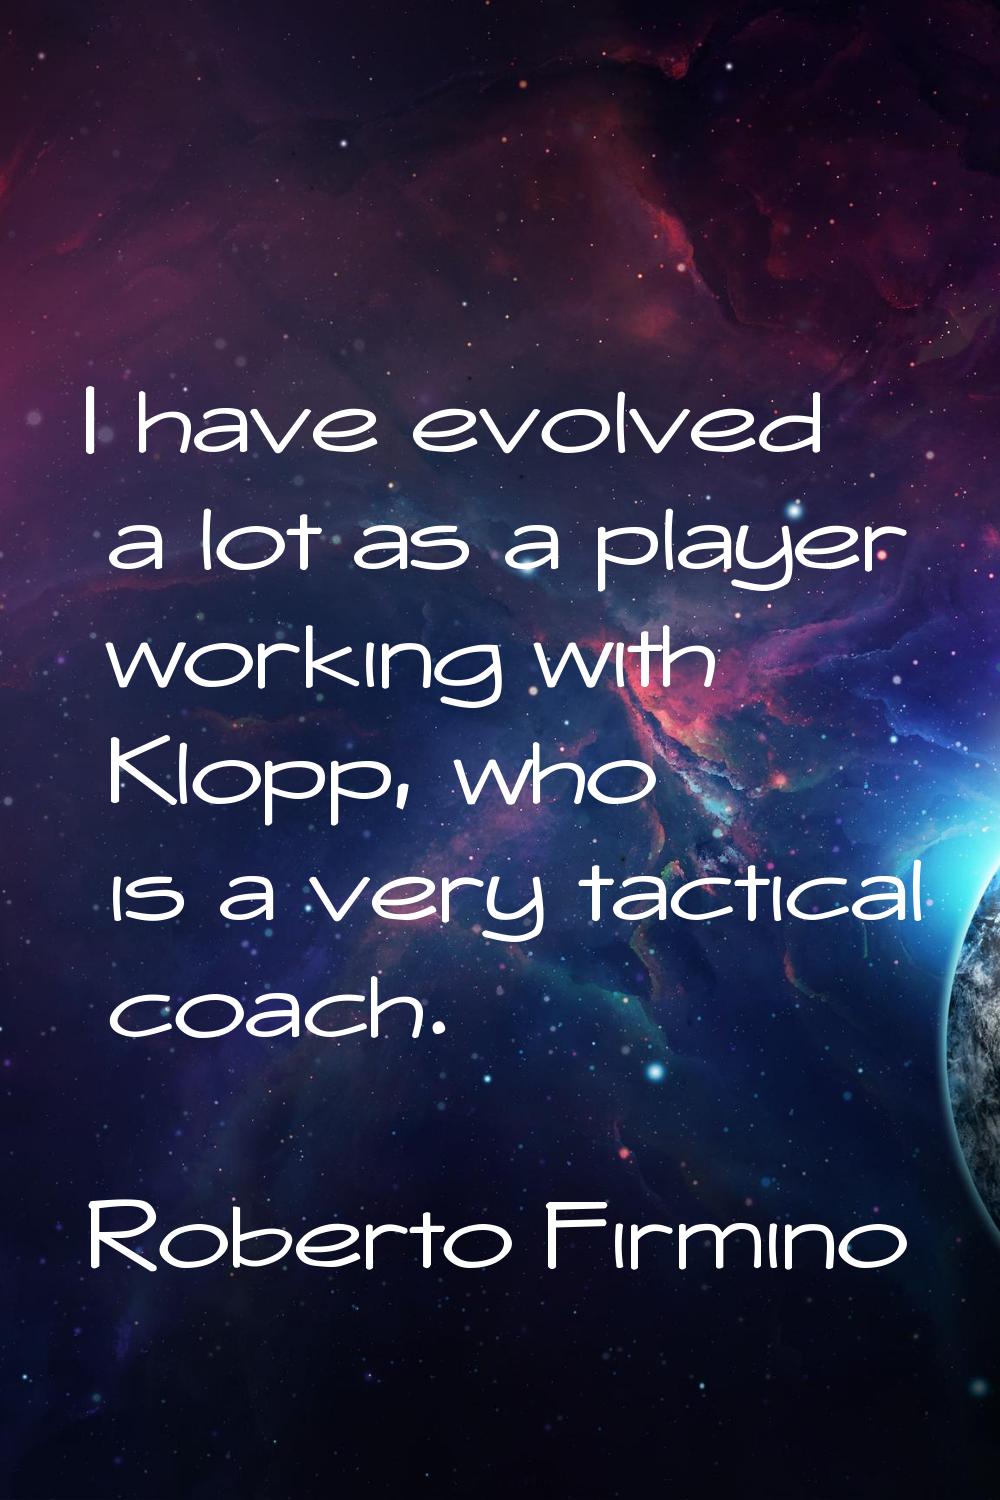 I have evolved a lot as a player working with Klopp, who is a very tactical coach.